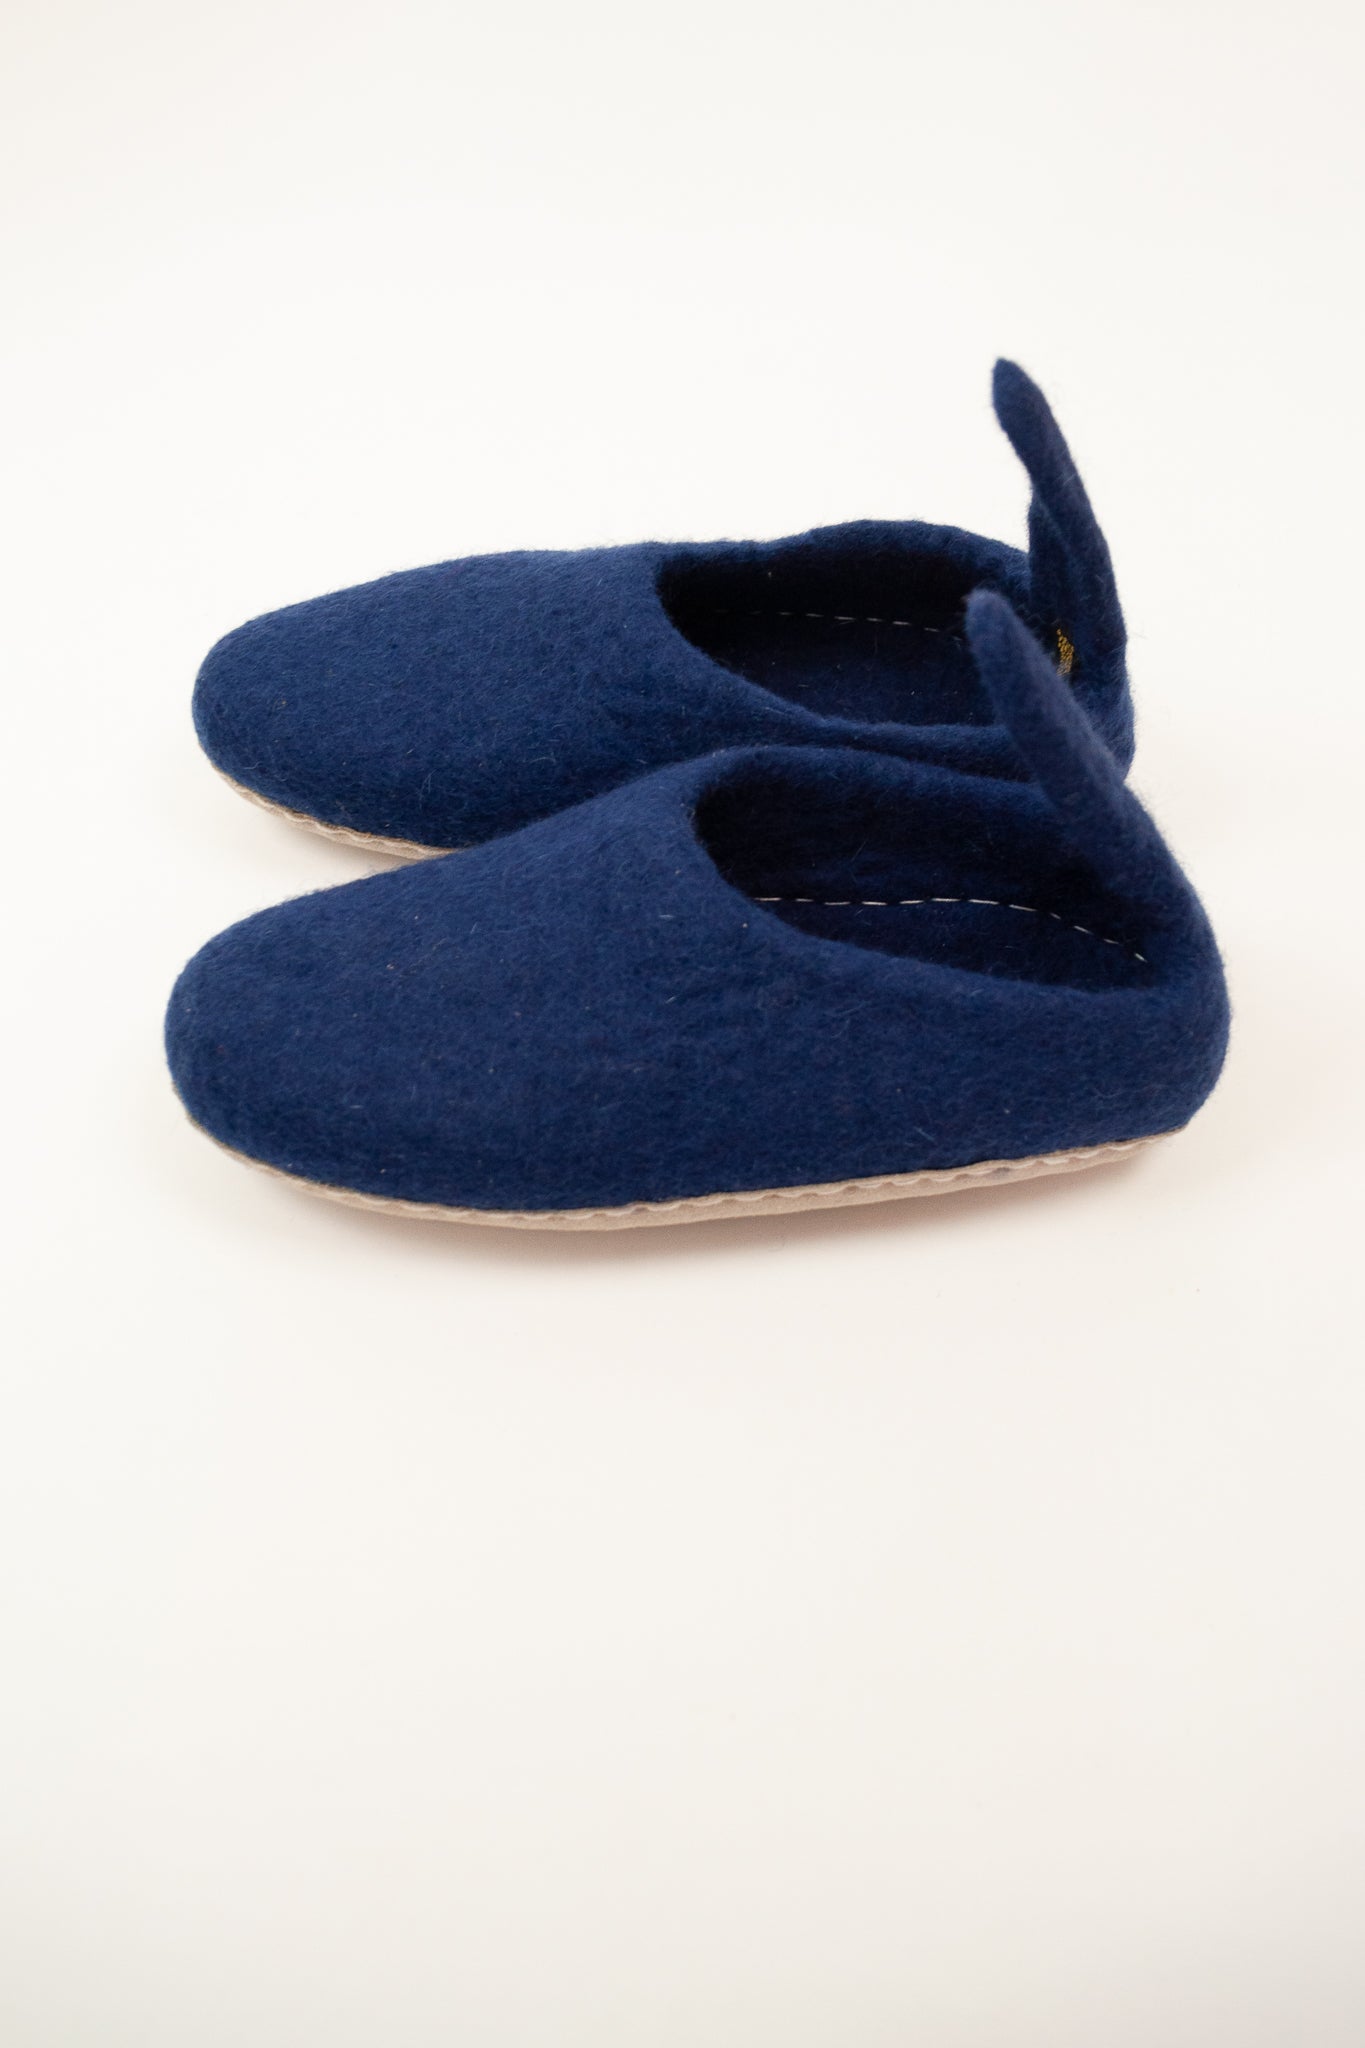 Navy blue wool felt slippers, pull on style with tab, fair trade and ethically made in Nepal.